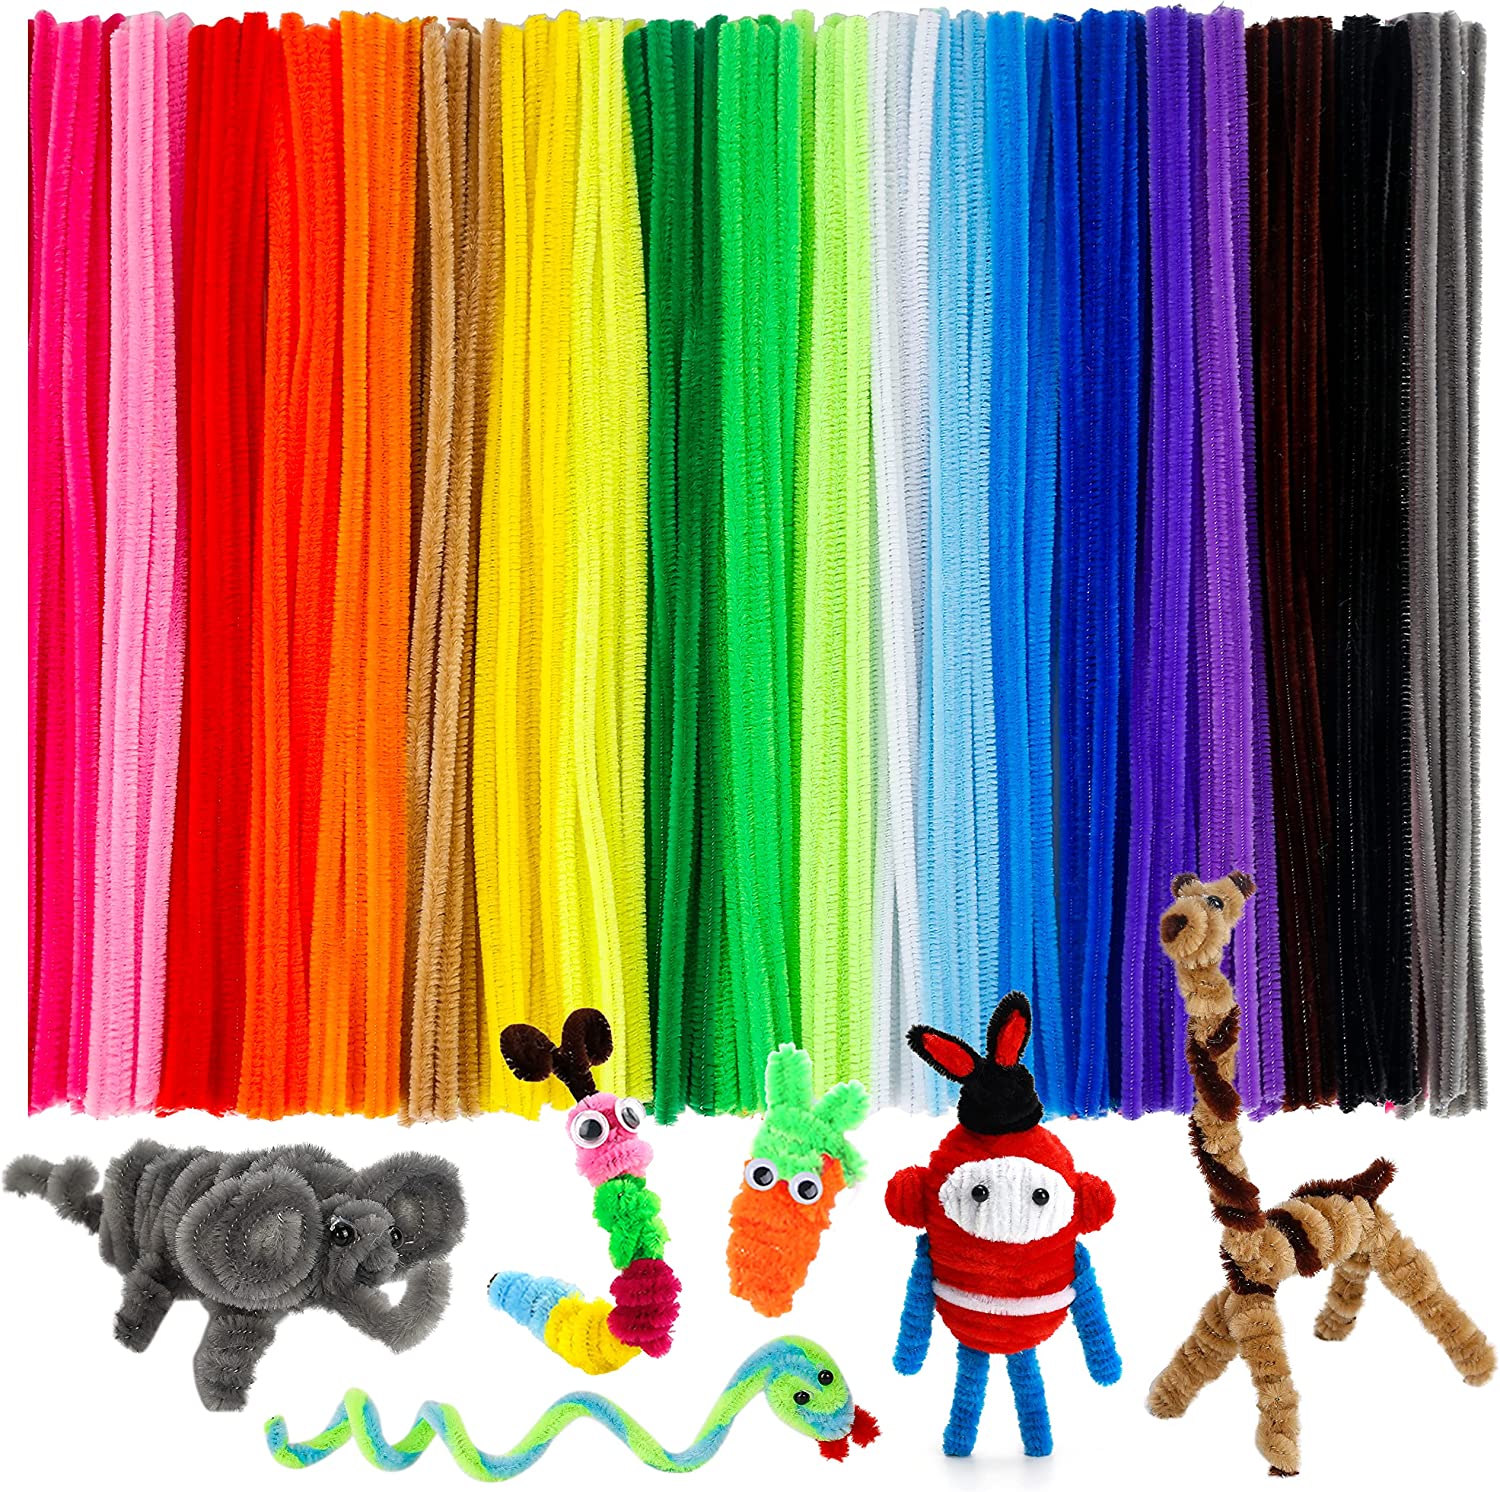 TOAOB 400pcs Pipe Cleaners Bulk 40 Assorted Colors Chenille Stems Craft  Supplies 6mm x 12 Inch Fuzzy Glitter Pipe Cleaners for DIY Art Crafts